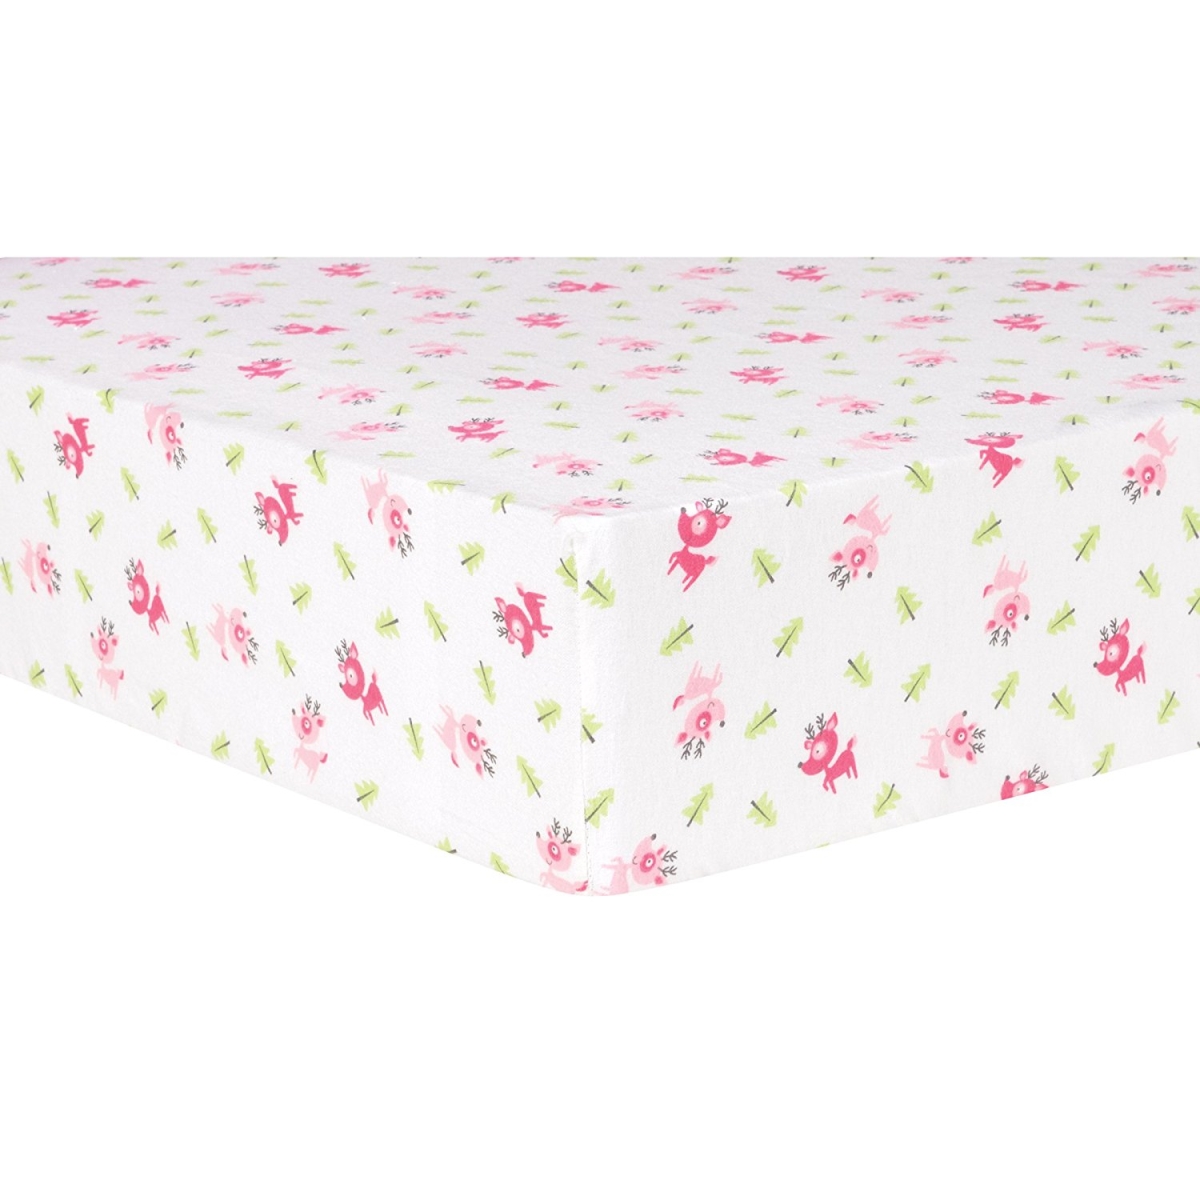 102736 Whim-g Pink Reindeer Deluxe Flannel Fitted Crib Sheet - Gray, Green, Pink & White<br>